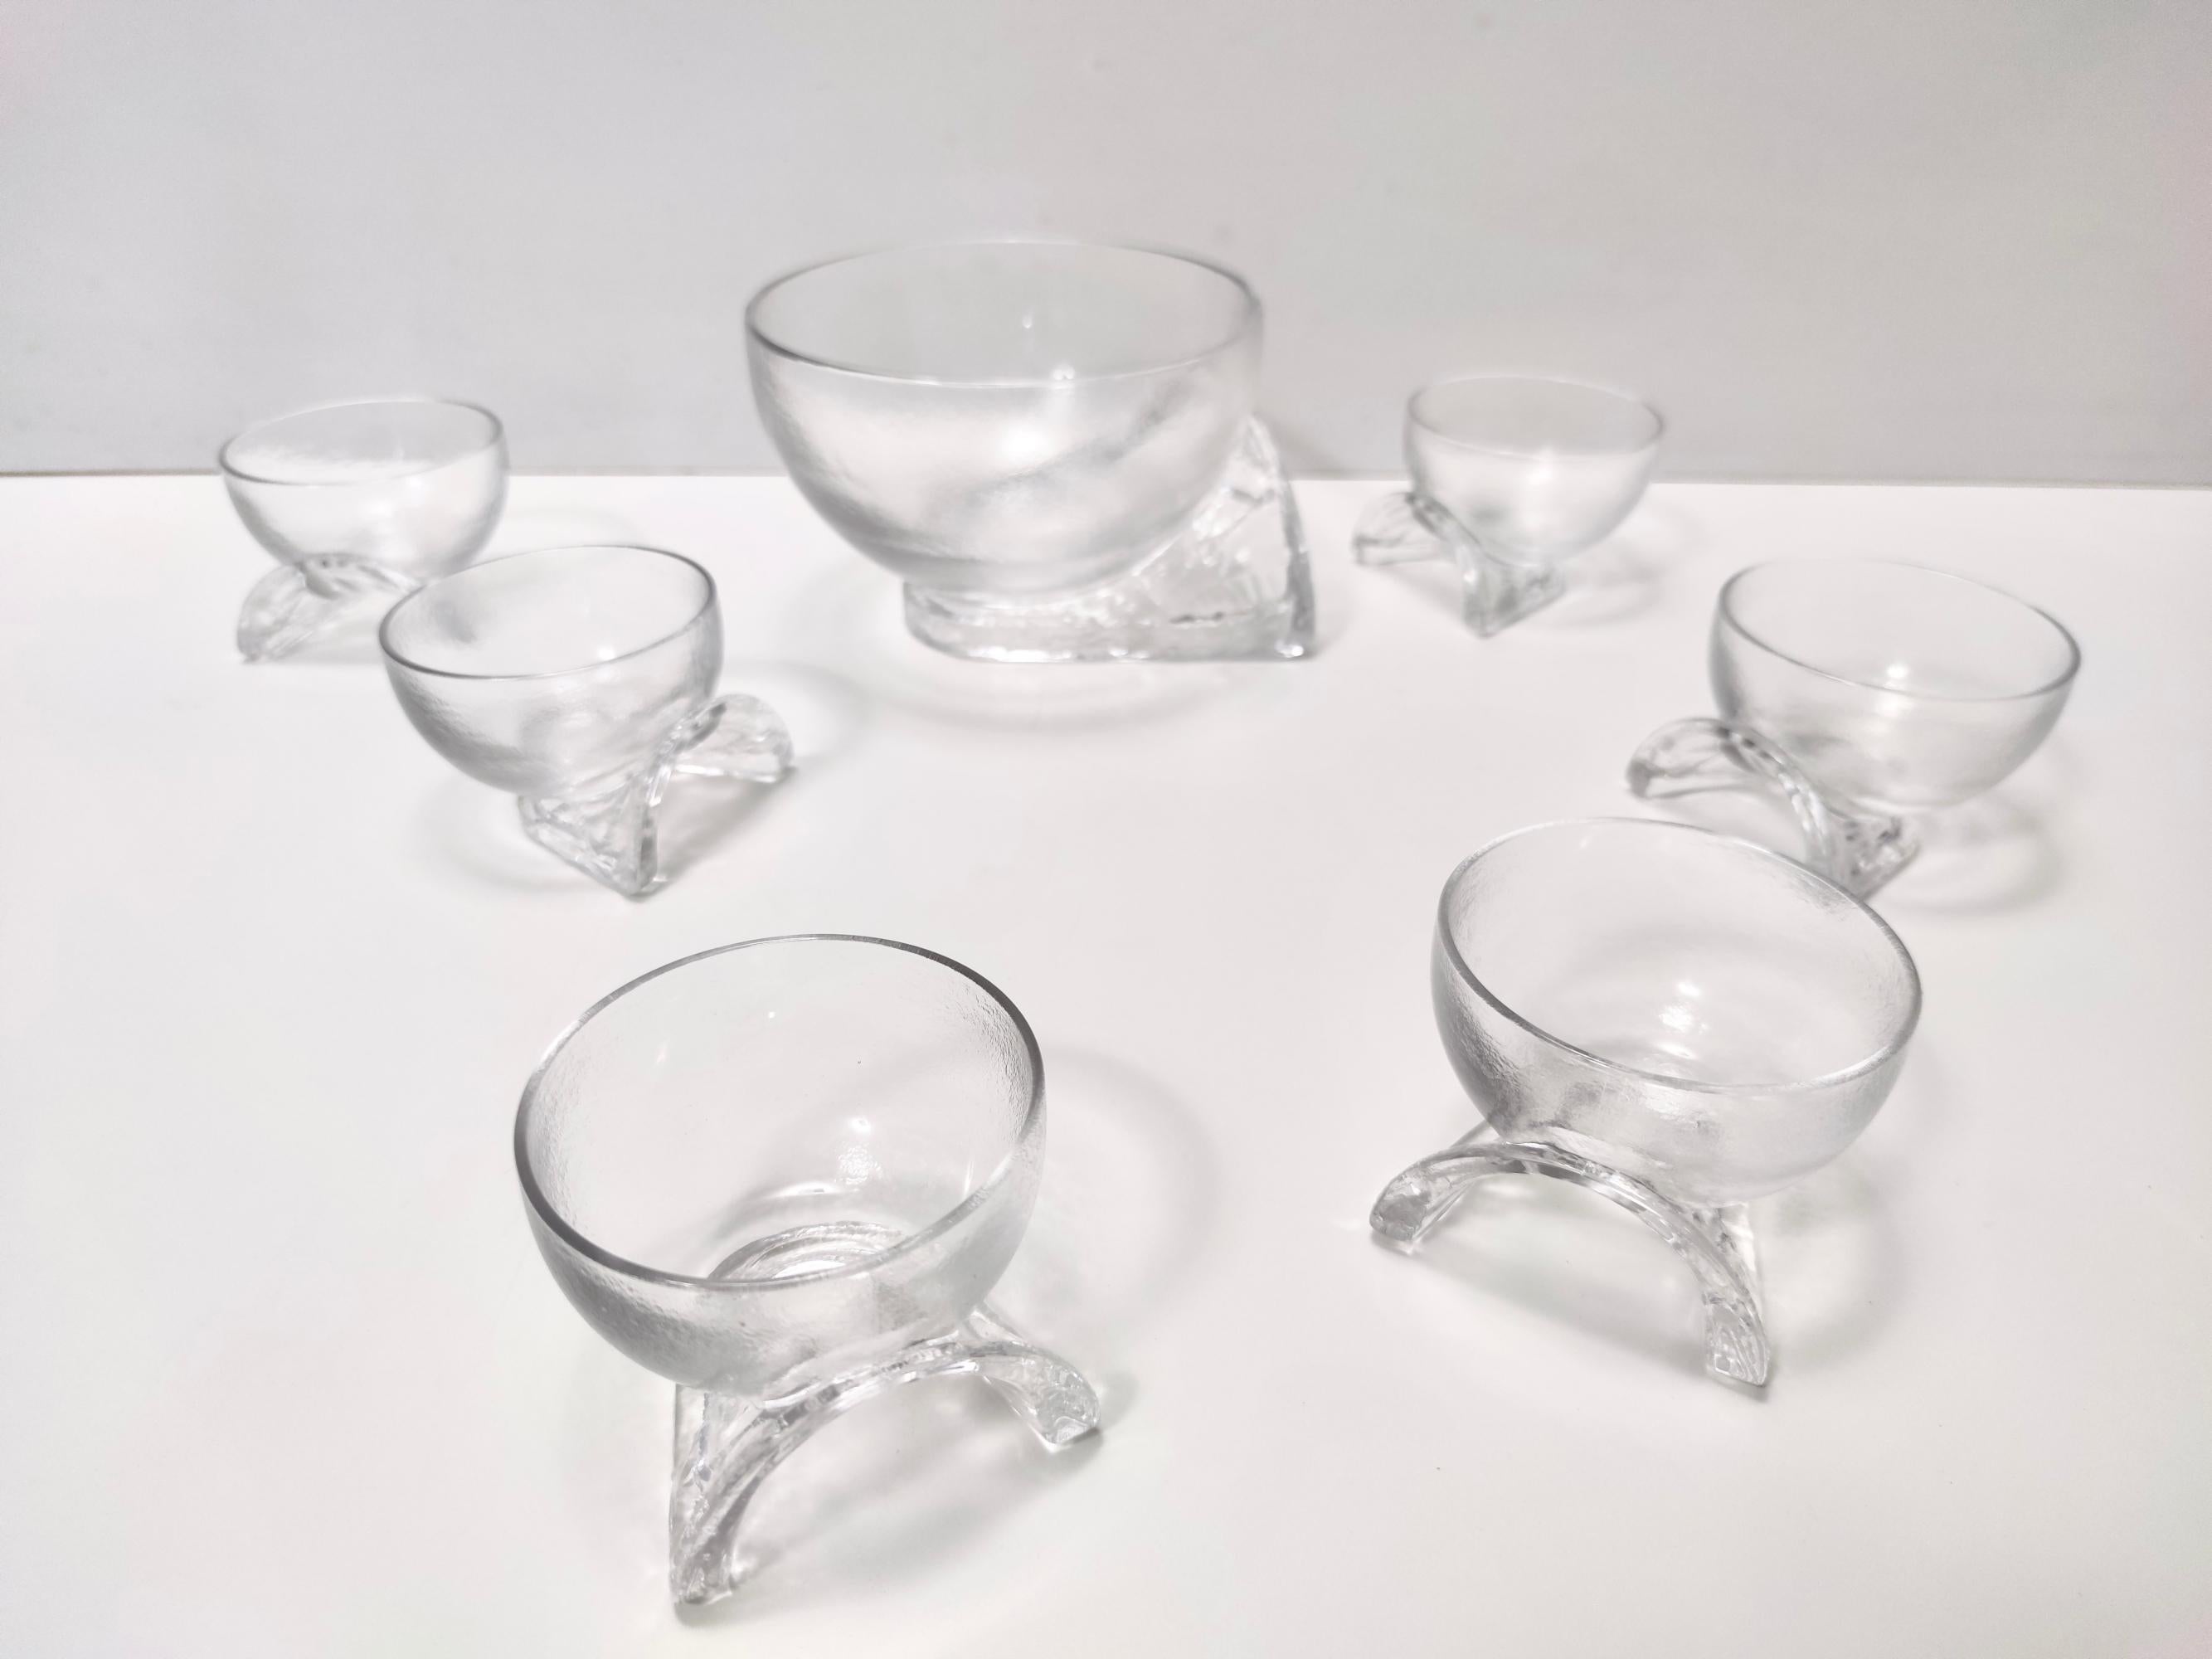 Made in Italy, 1970s. 
This is an elegant set of serving bowls, that looks like it's made out of ice.
It has a peculiar grip, as shown in the pictures, that allows to keep one bowl on two fingers. 
This set was designed by the architect Taddei